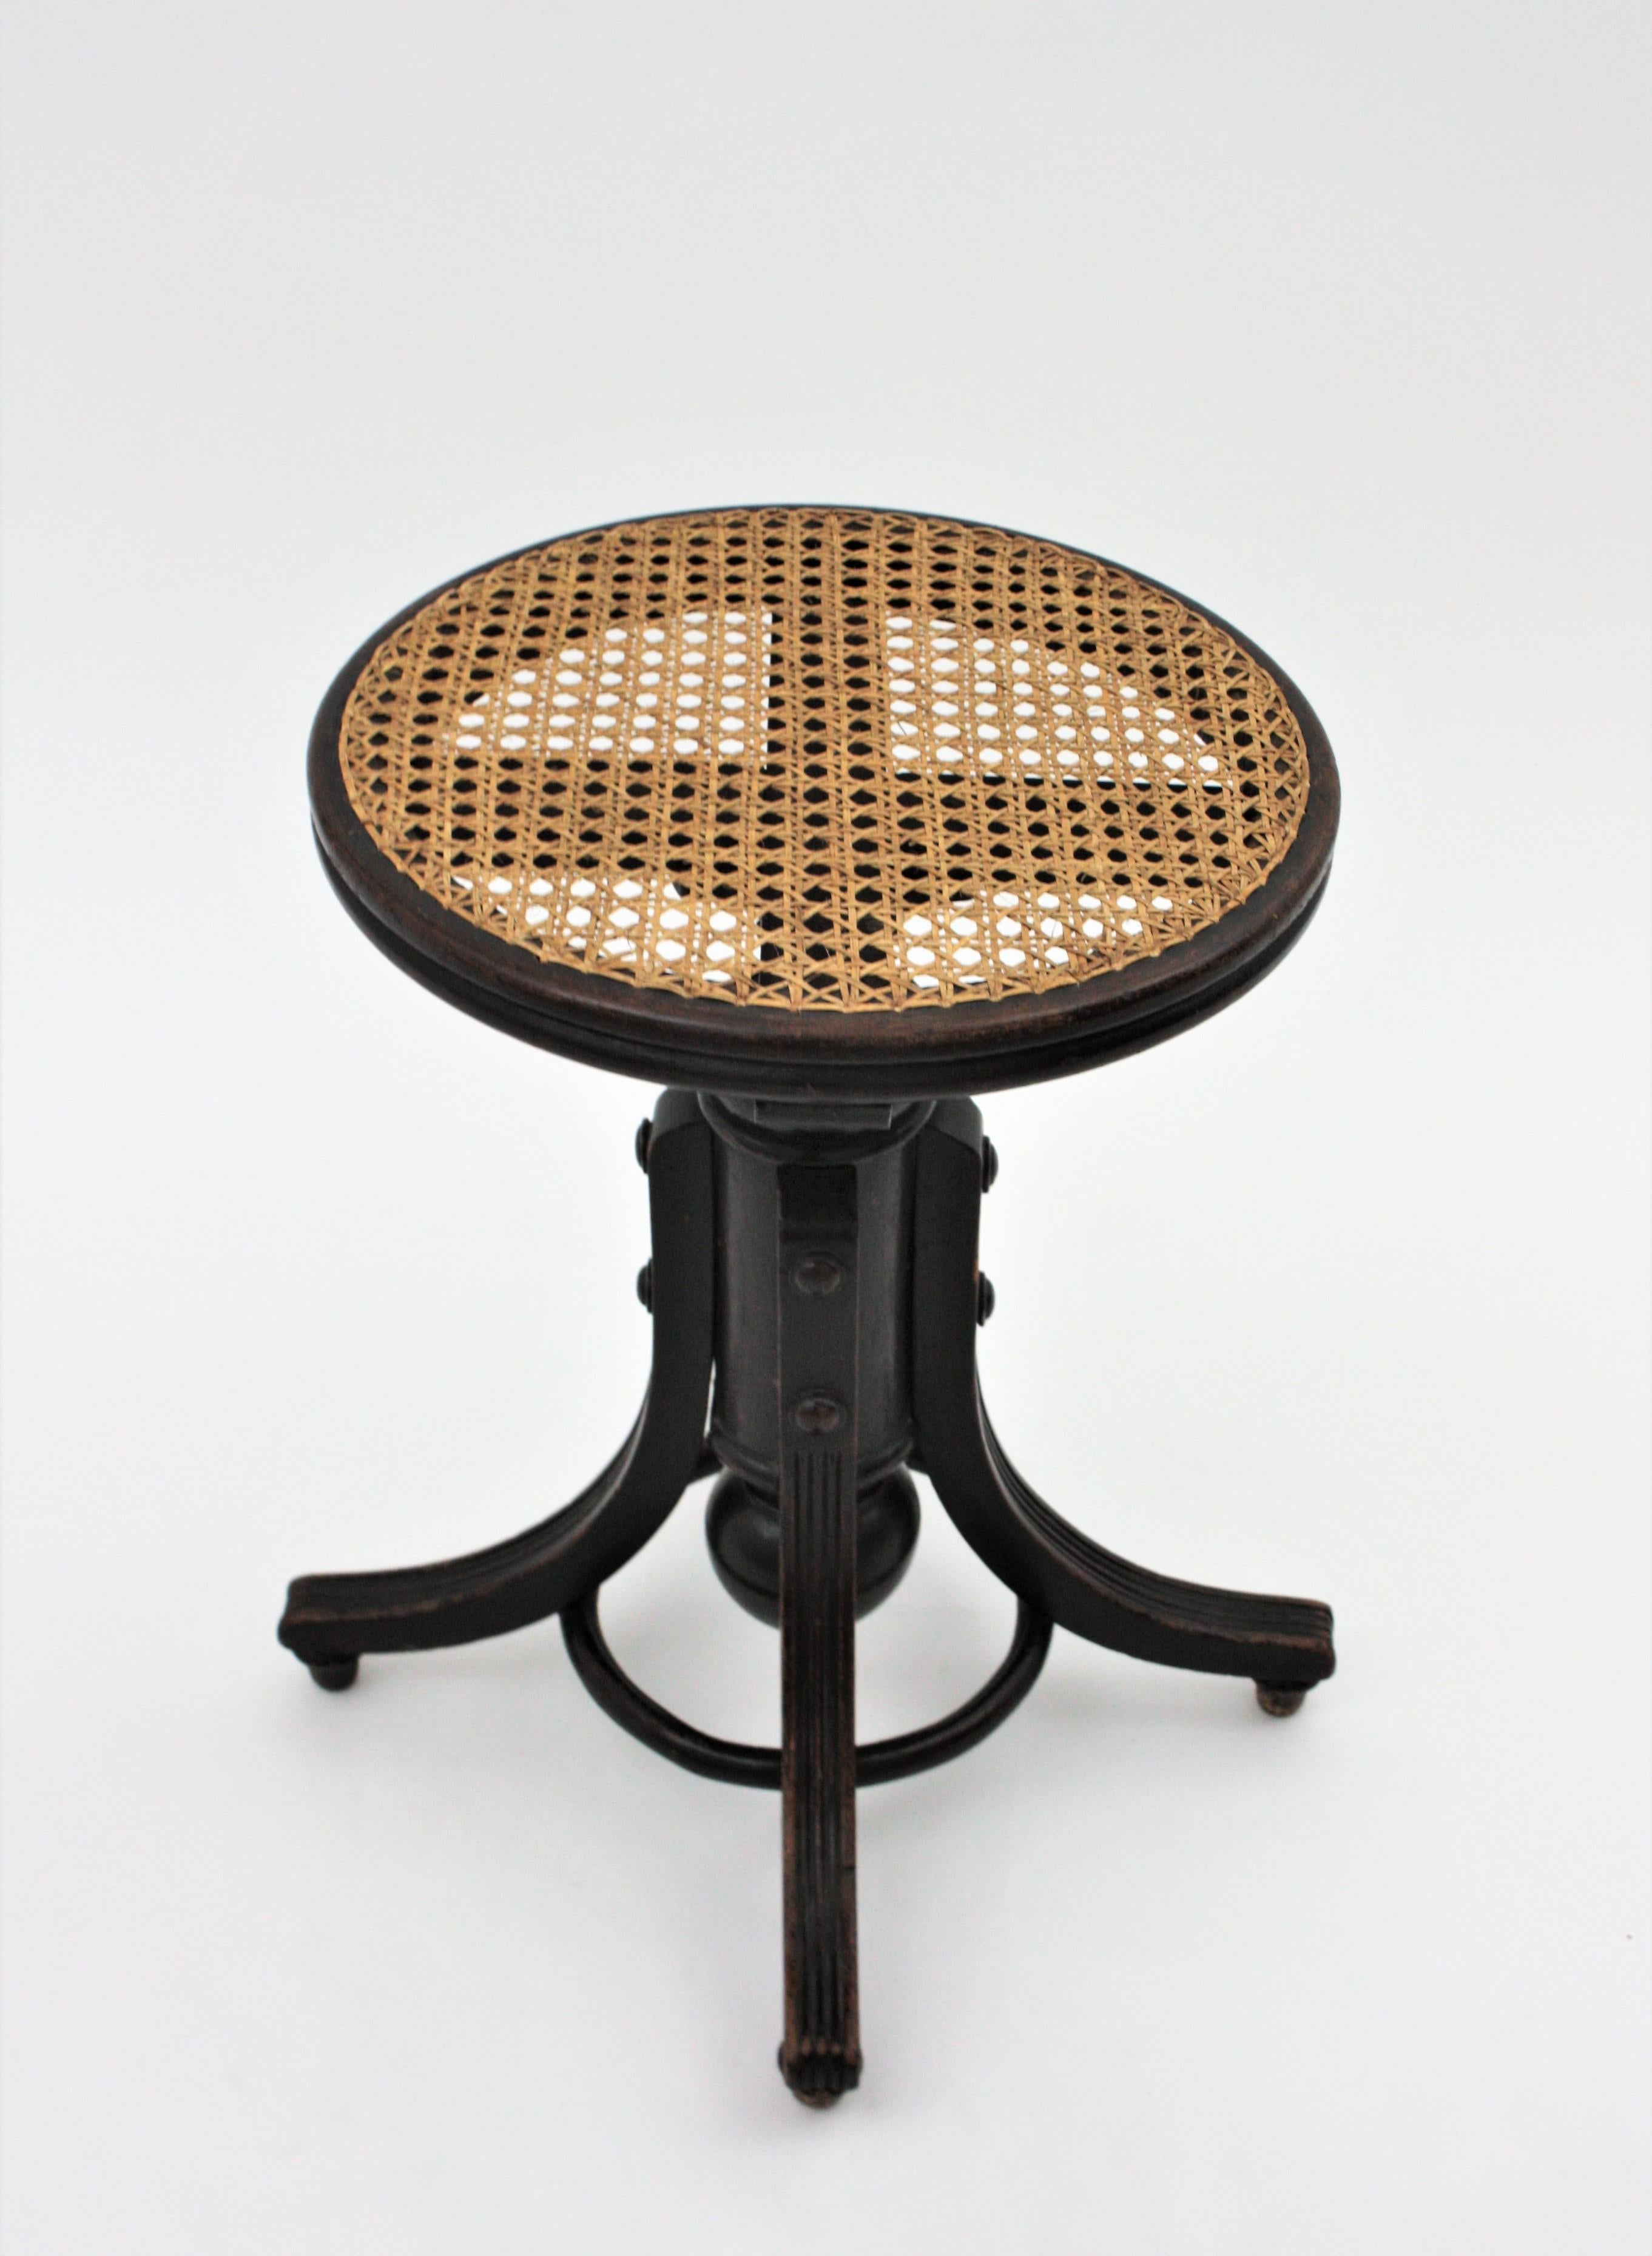 Thonet Style Revolving Stool with Cane Seat 6